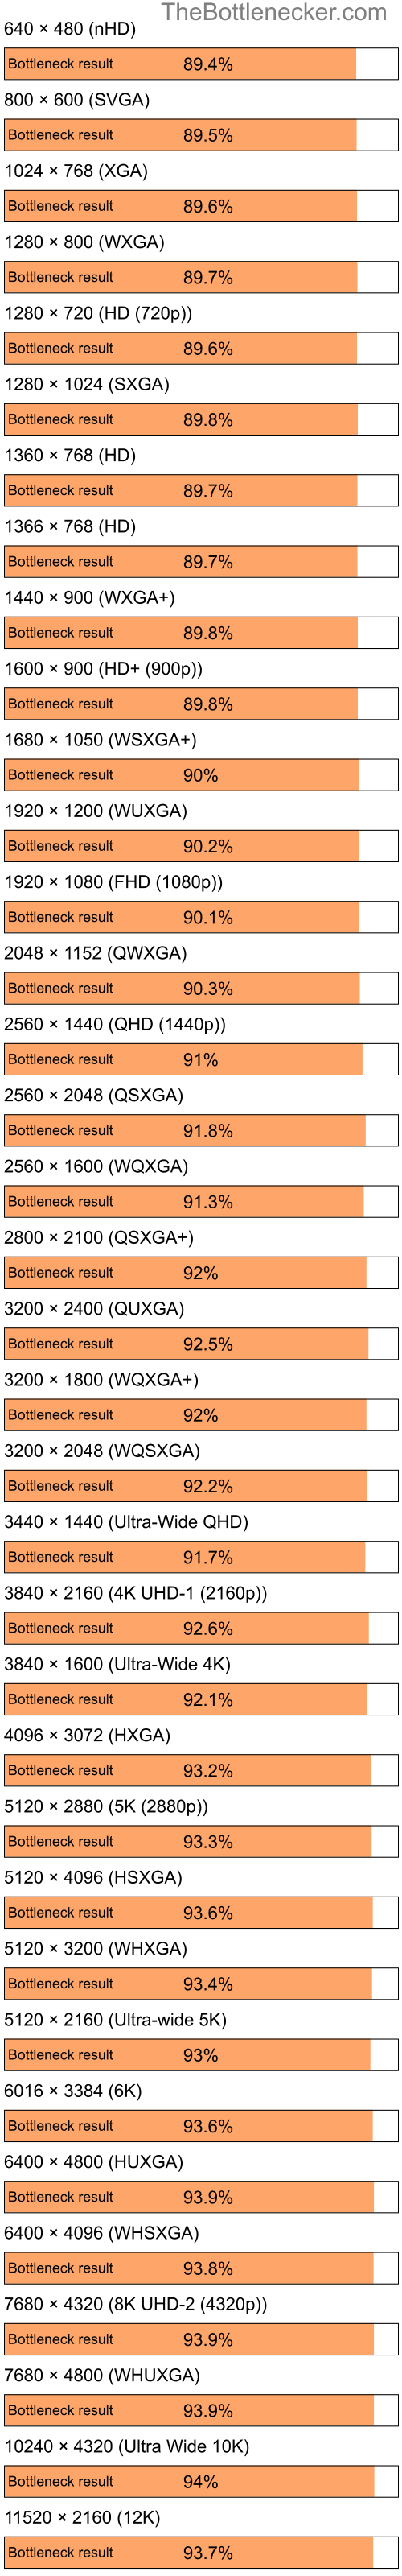 Bottleneck results by resolution for Intel Celeron M 420 and AMD Mobility Radeon 9000 in General Tasks